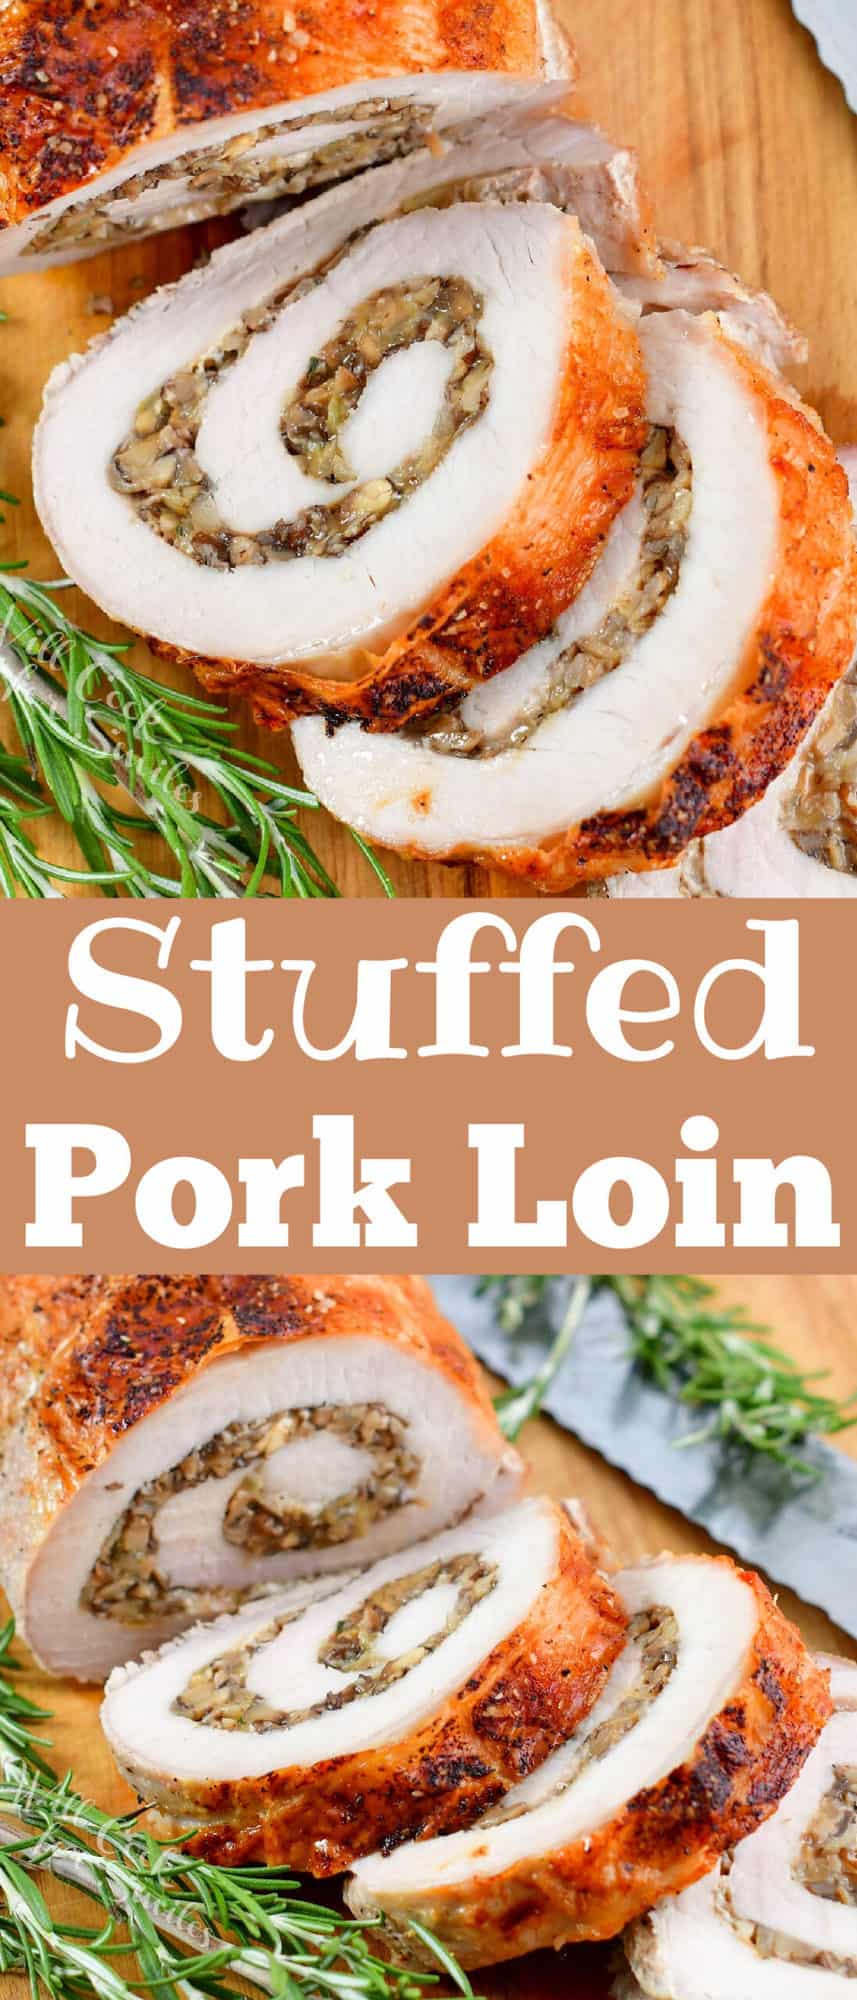 collage of two images of sliced stuffed pork loin and title in the middle